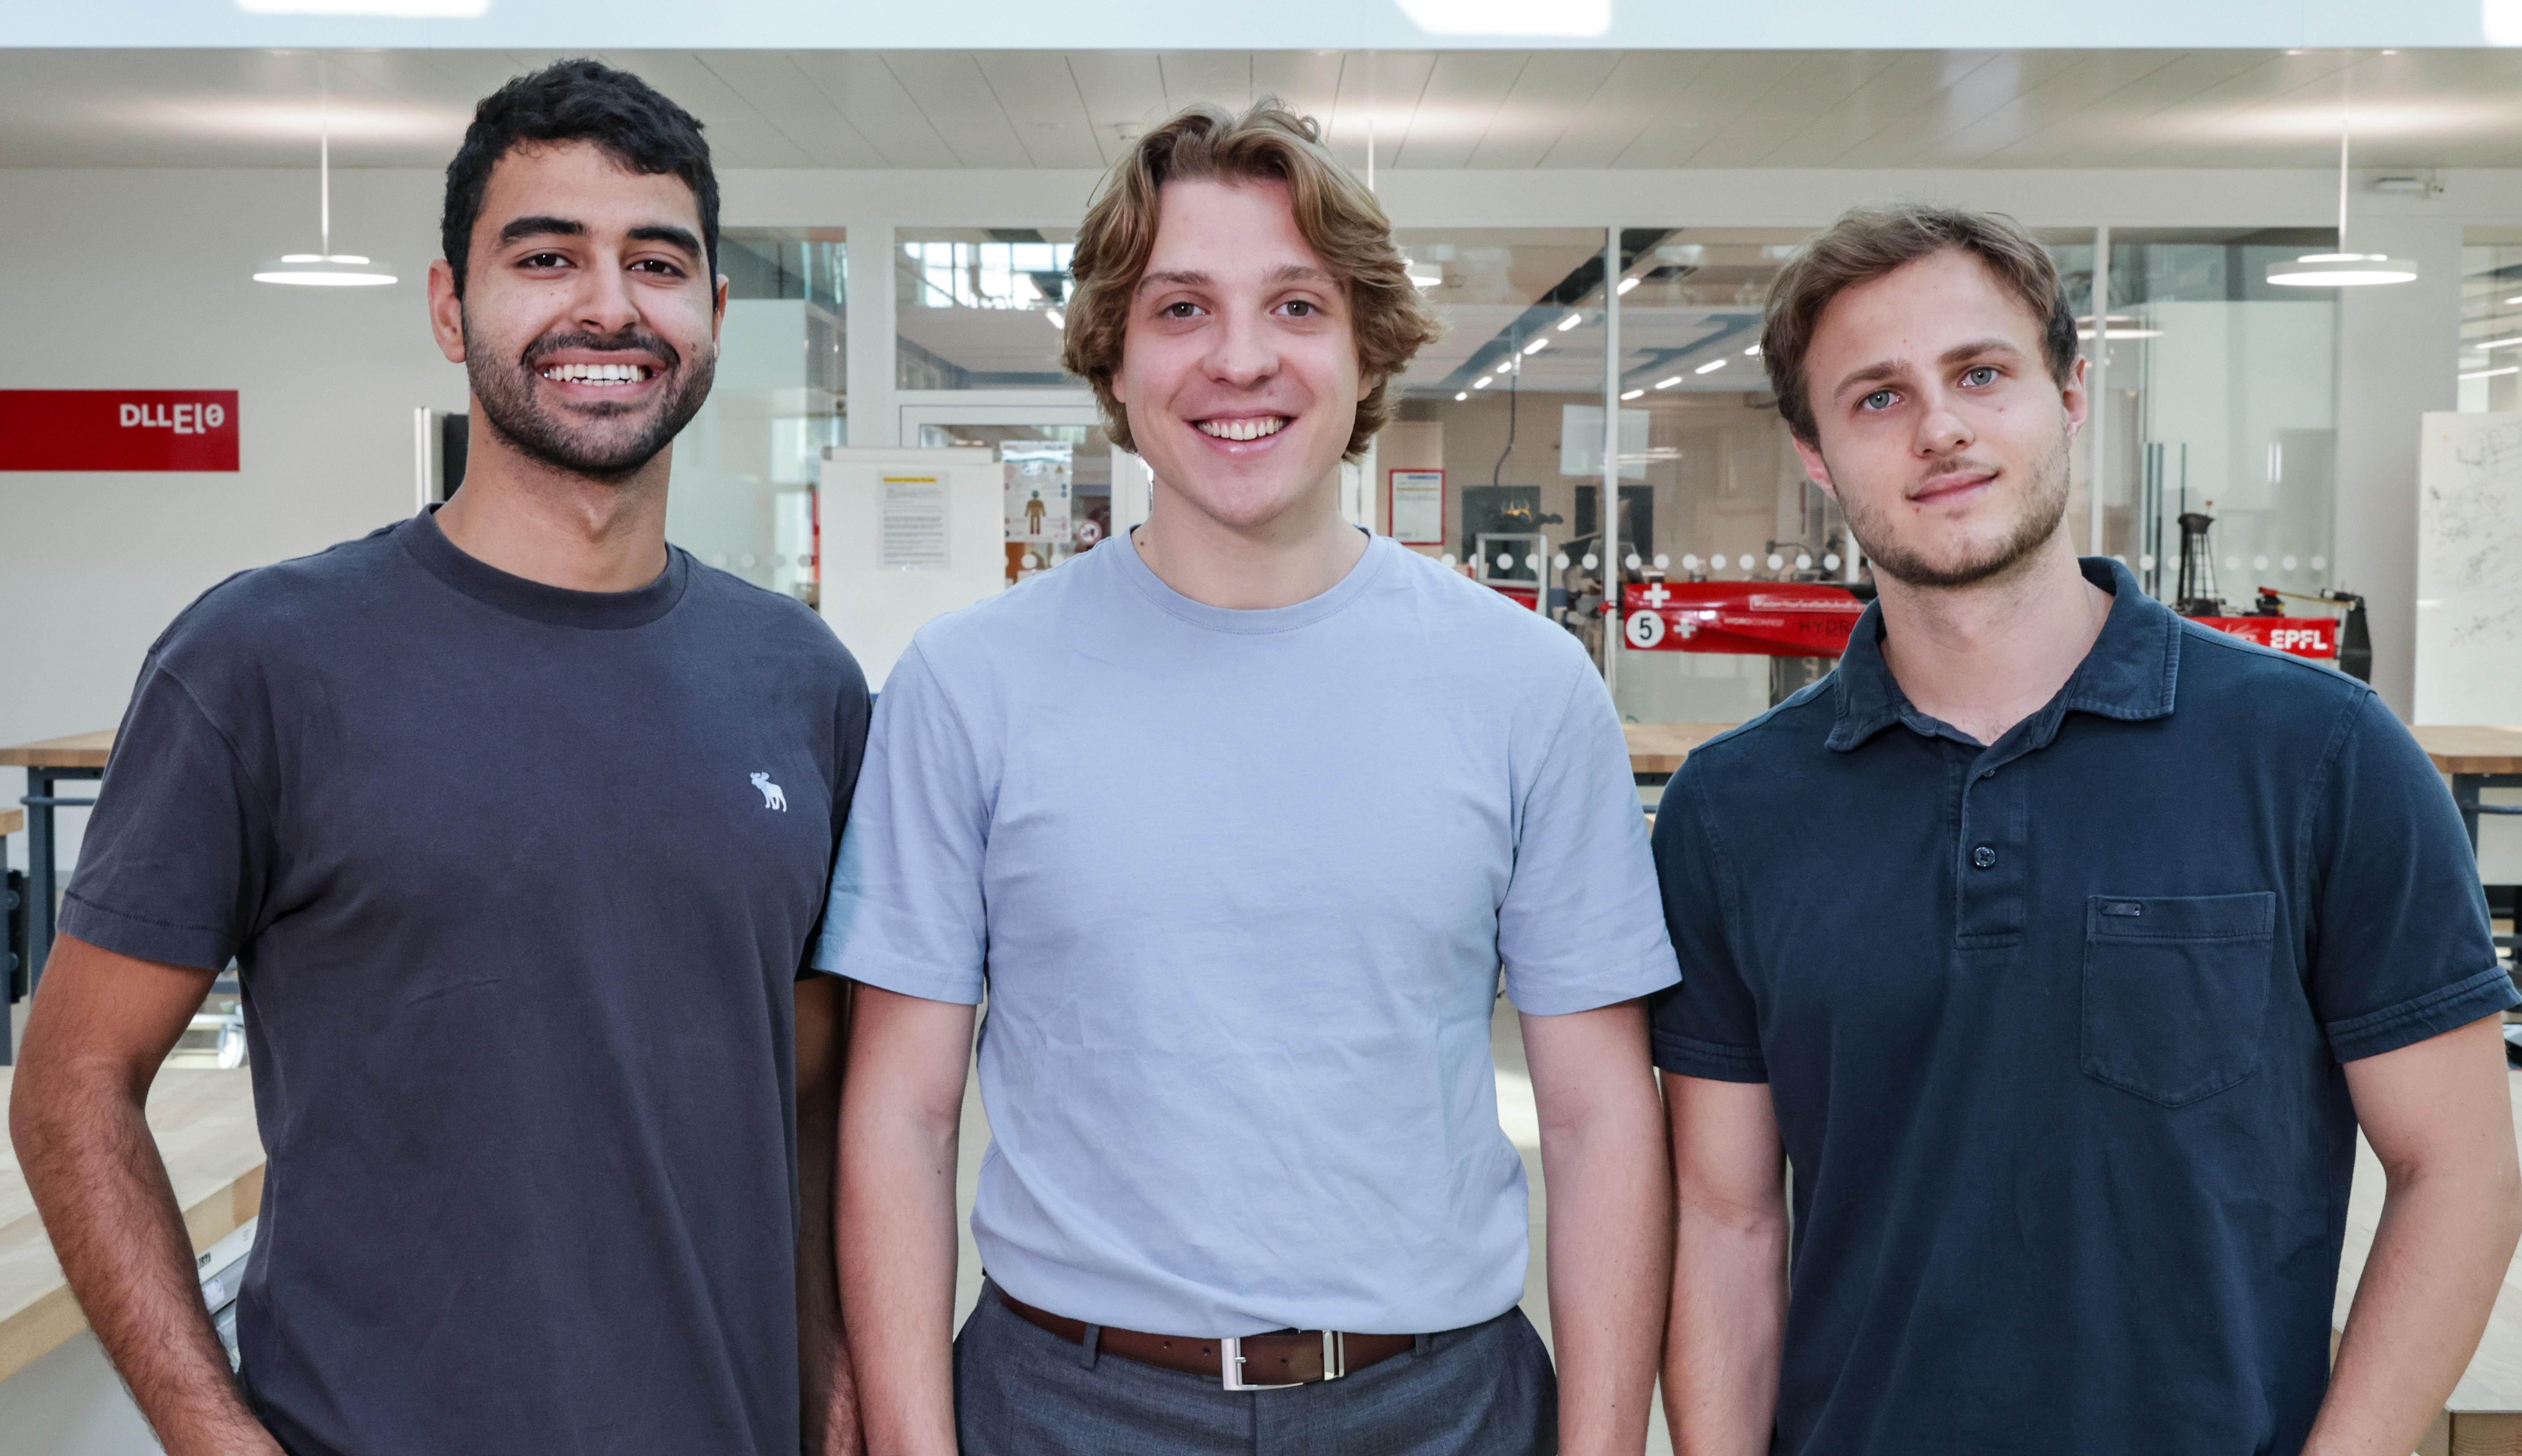 Team NEOSENS with its 3 co-founders - from left to right: Karim Zahra, Matéo Hamel and Marco Fumagalli